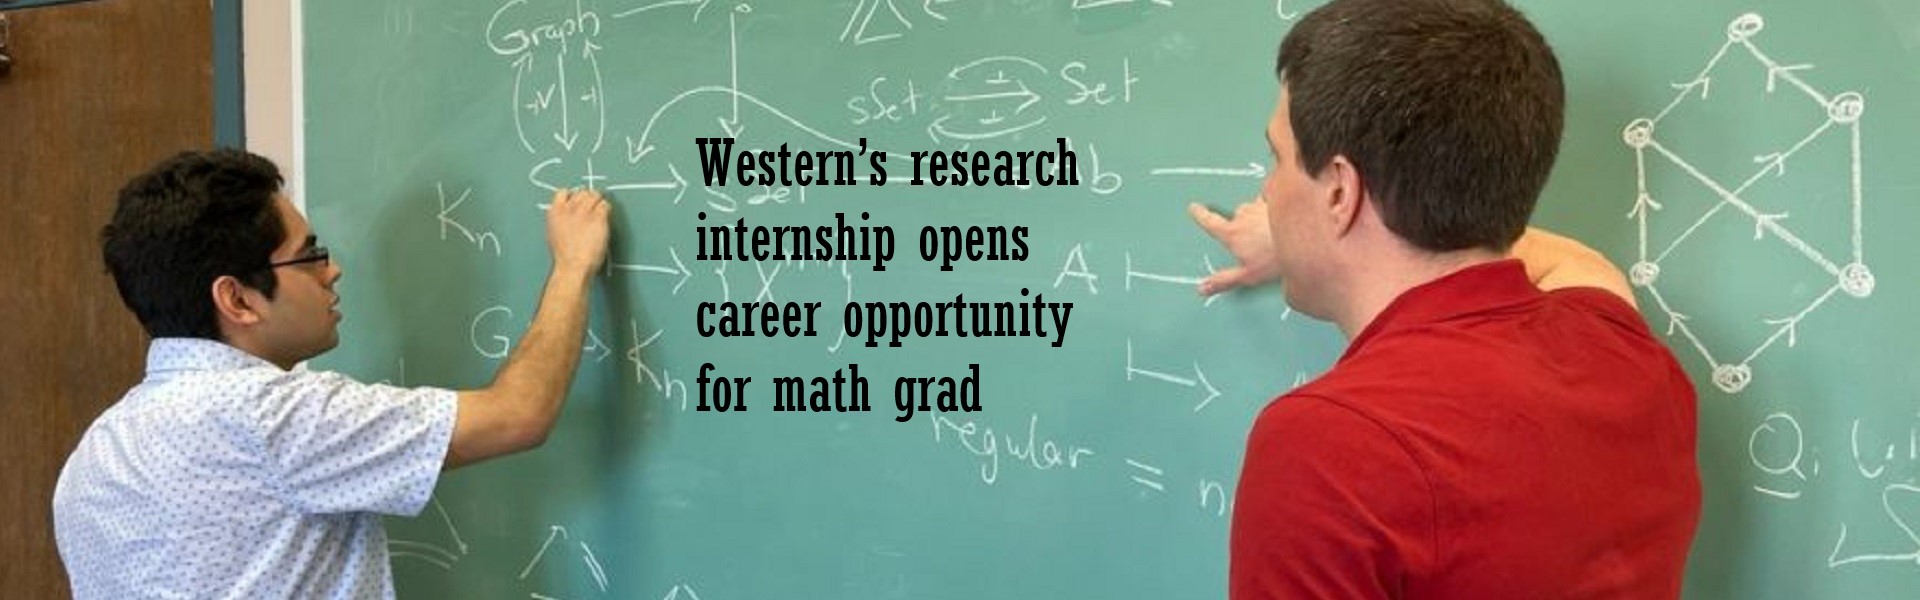 Western’s research internship opens career opportunity for math grad
Daniel Carranza’s research earns him PhD spot at Johns Hopkins